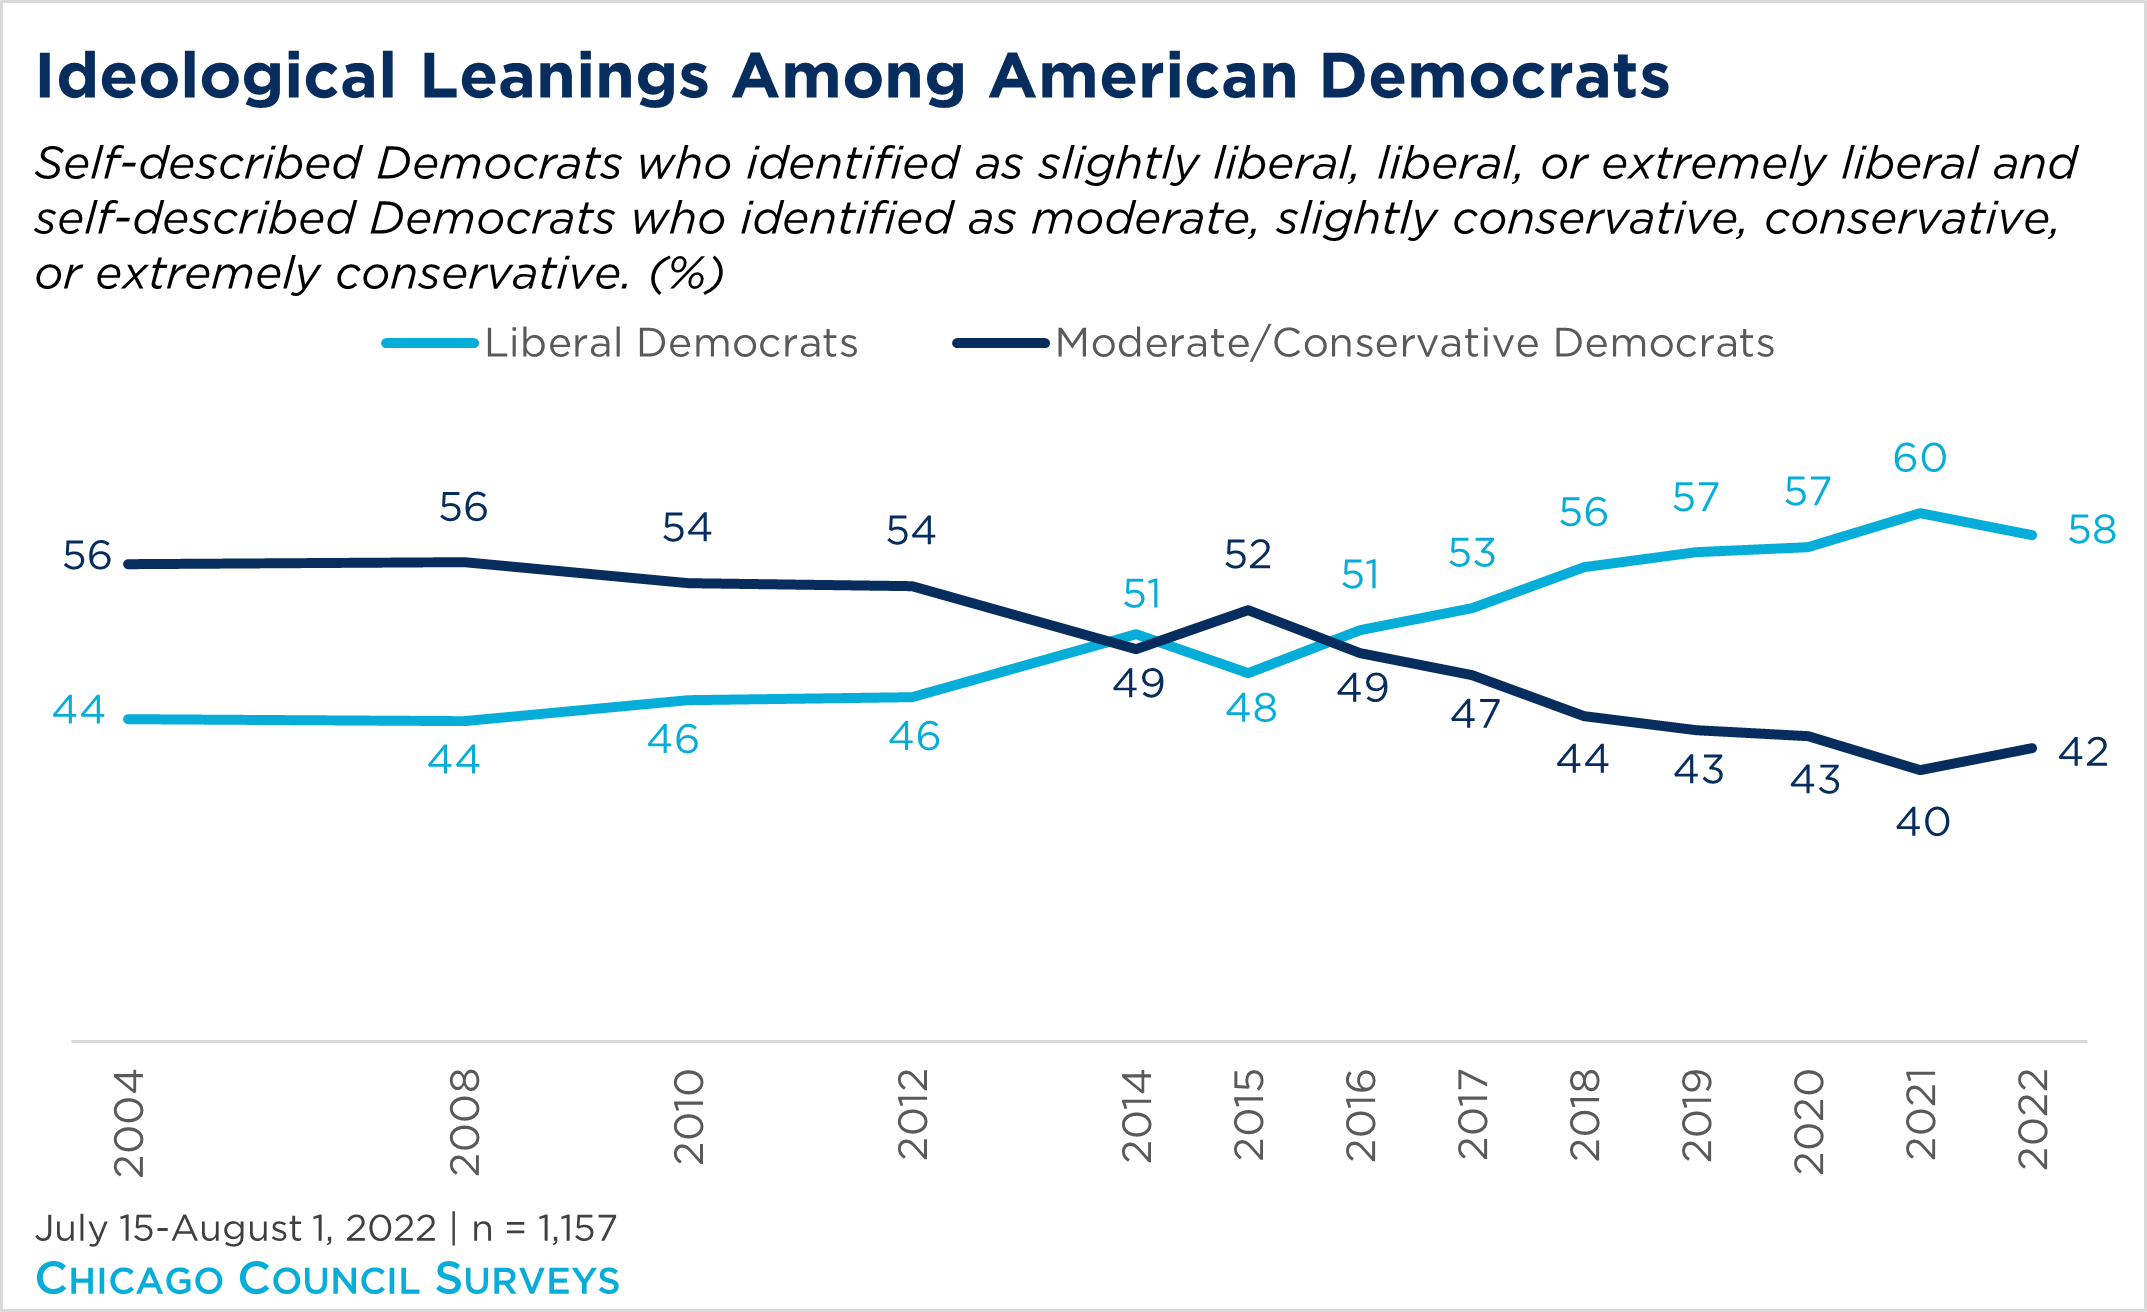 "line chart showing Democrat ideological leanings over time"